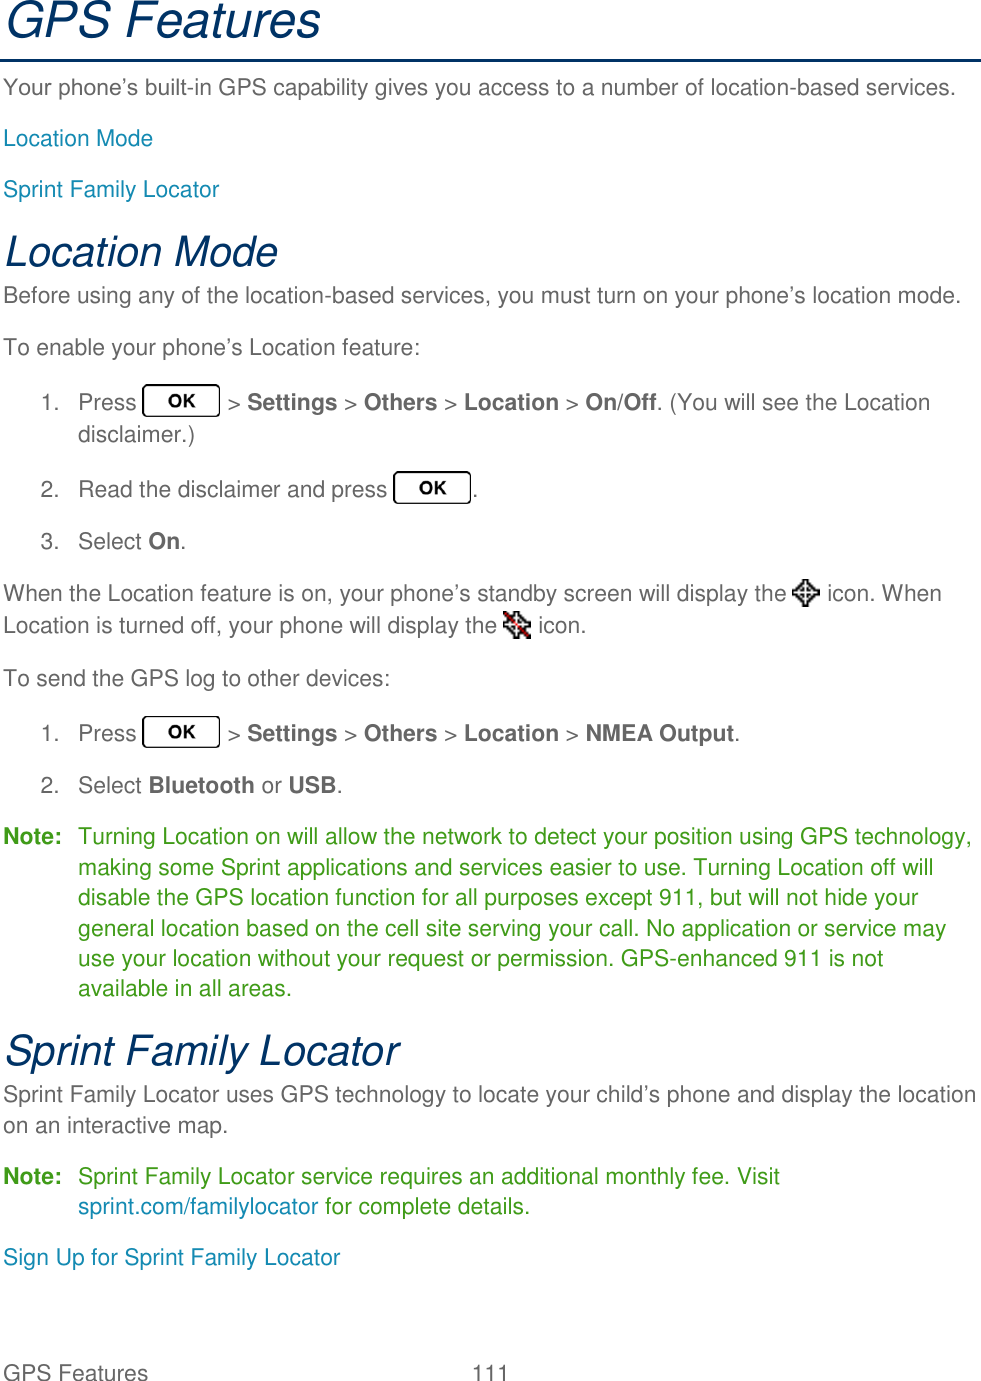 GPS Features  111   GPS Features Your phone’s built-in GPS capability gives you access to a number of location-based services. Location Mode Sprint Family Locator Location Mode Before using any of the location-based services, you must turn on your phone’s location mode. To enable your phone’s Location feature: 1.  Press   &gt; Settings &gt; Others &gt; Location &gt; On/Off. (You will see the Location disclaimer.) 2.  Read the disclaimer and press  . 3.  Select On. When the Location feature is on, your phone’s standby screen will display the   icon. When Location is turned off, your phone will display the   icon. To send the GPS log to other devices: 1.  Press   &gt; Settings &gt; Others &gt; Location &gt; NMEA Output. 2.  Select Bluetooth or USB. Note:  Turning Location on will allow the network to detect your position using GPS technology, making some Sprint applications and services easier to use. Turning Location off will disable the GPS location function for all purposes except 911, but will not hide your general location based on the cell site serving your call. No application or service may use your location without your request or permission. GPS-enhanced 911 is not available in all areas. Sprint Family Locator Sprint Family Locator uses GPS technology to locate your child’s phone and display the location on an interactive map. Note:  Sprint Family Locator service requires an additional monthly fee. Visit sprint.com/familylocator for complete details. Sign Up for Sprint Family Locator 